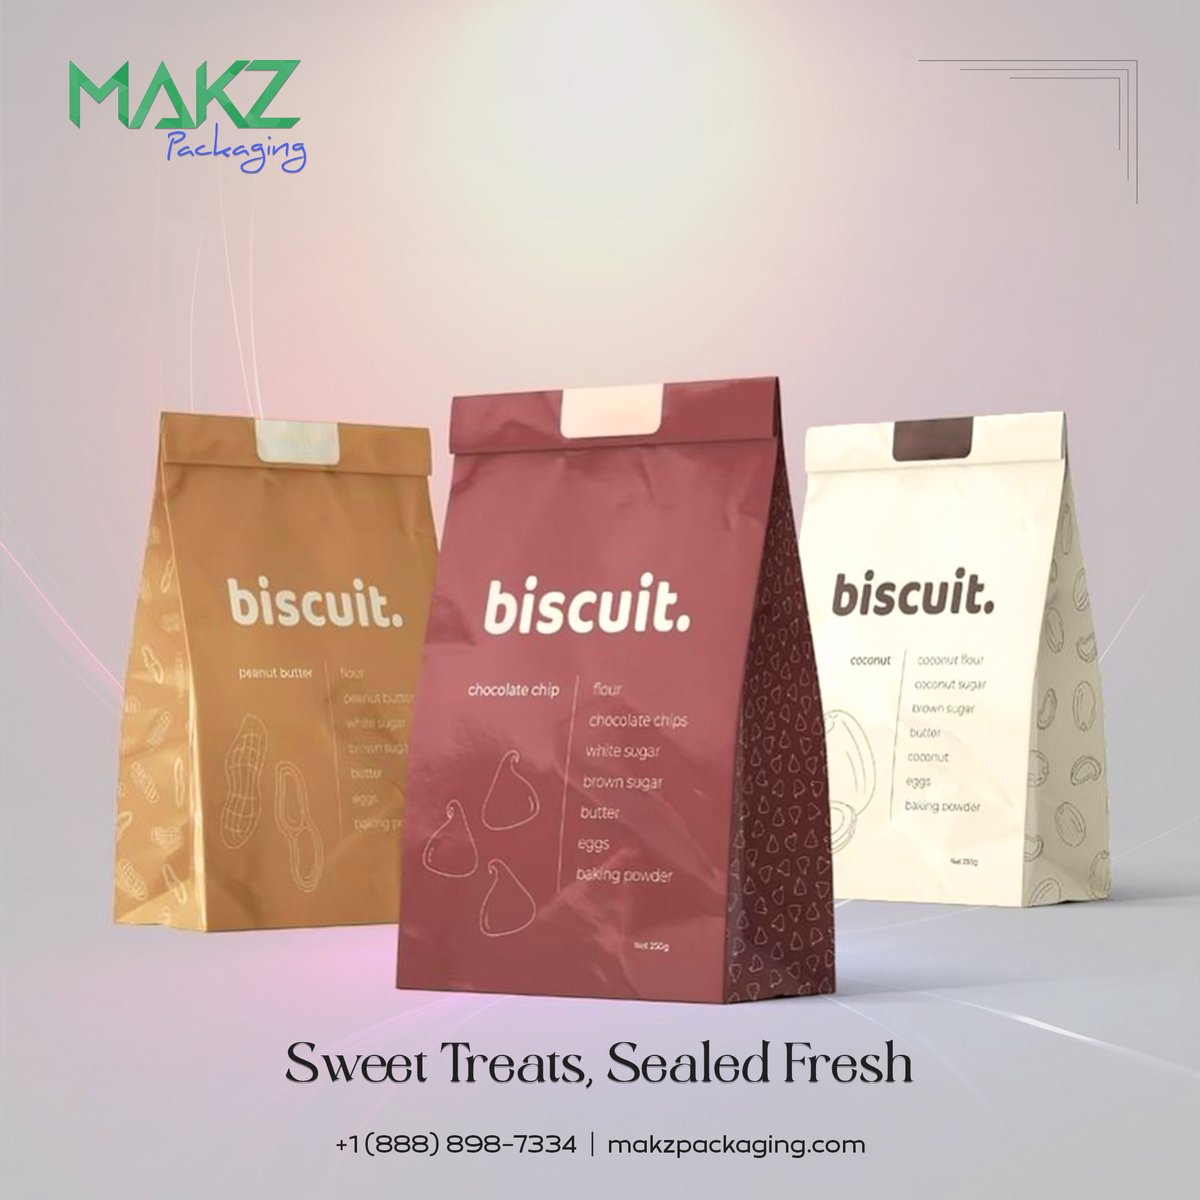 Secure the sweetness with Makz's irresistible cookie bags.

Level up your cookie presentation and make a lasting impact with Makz's charming bags.

makzpackaging.com/shape-and-styl…

#cookies #cookiebags #makzpackaging